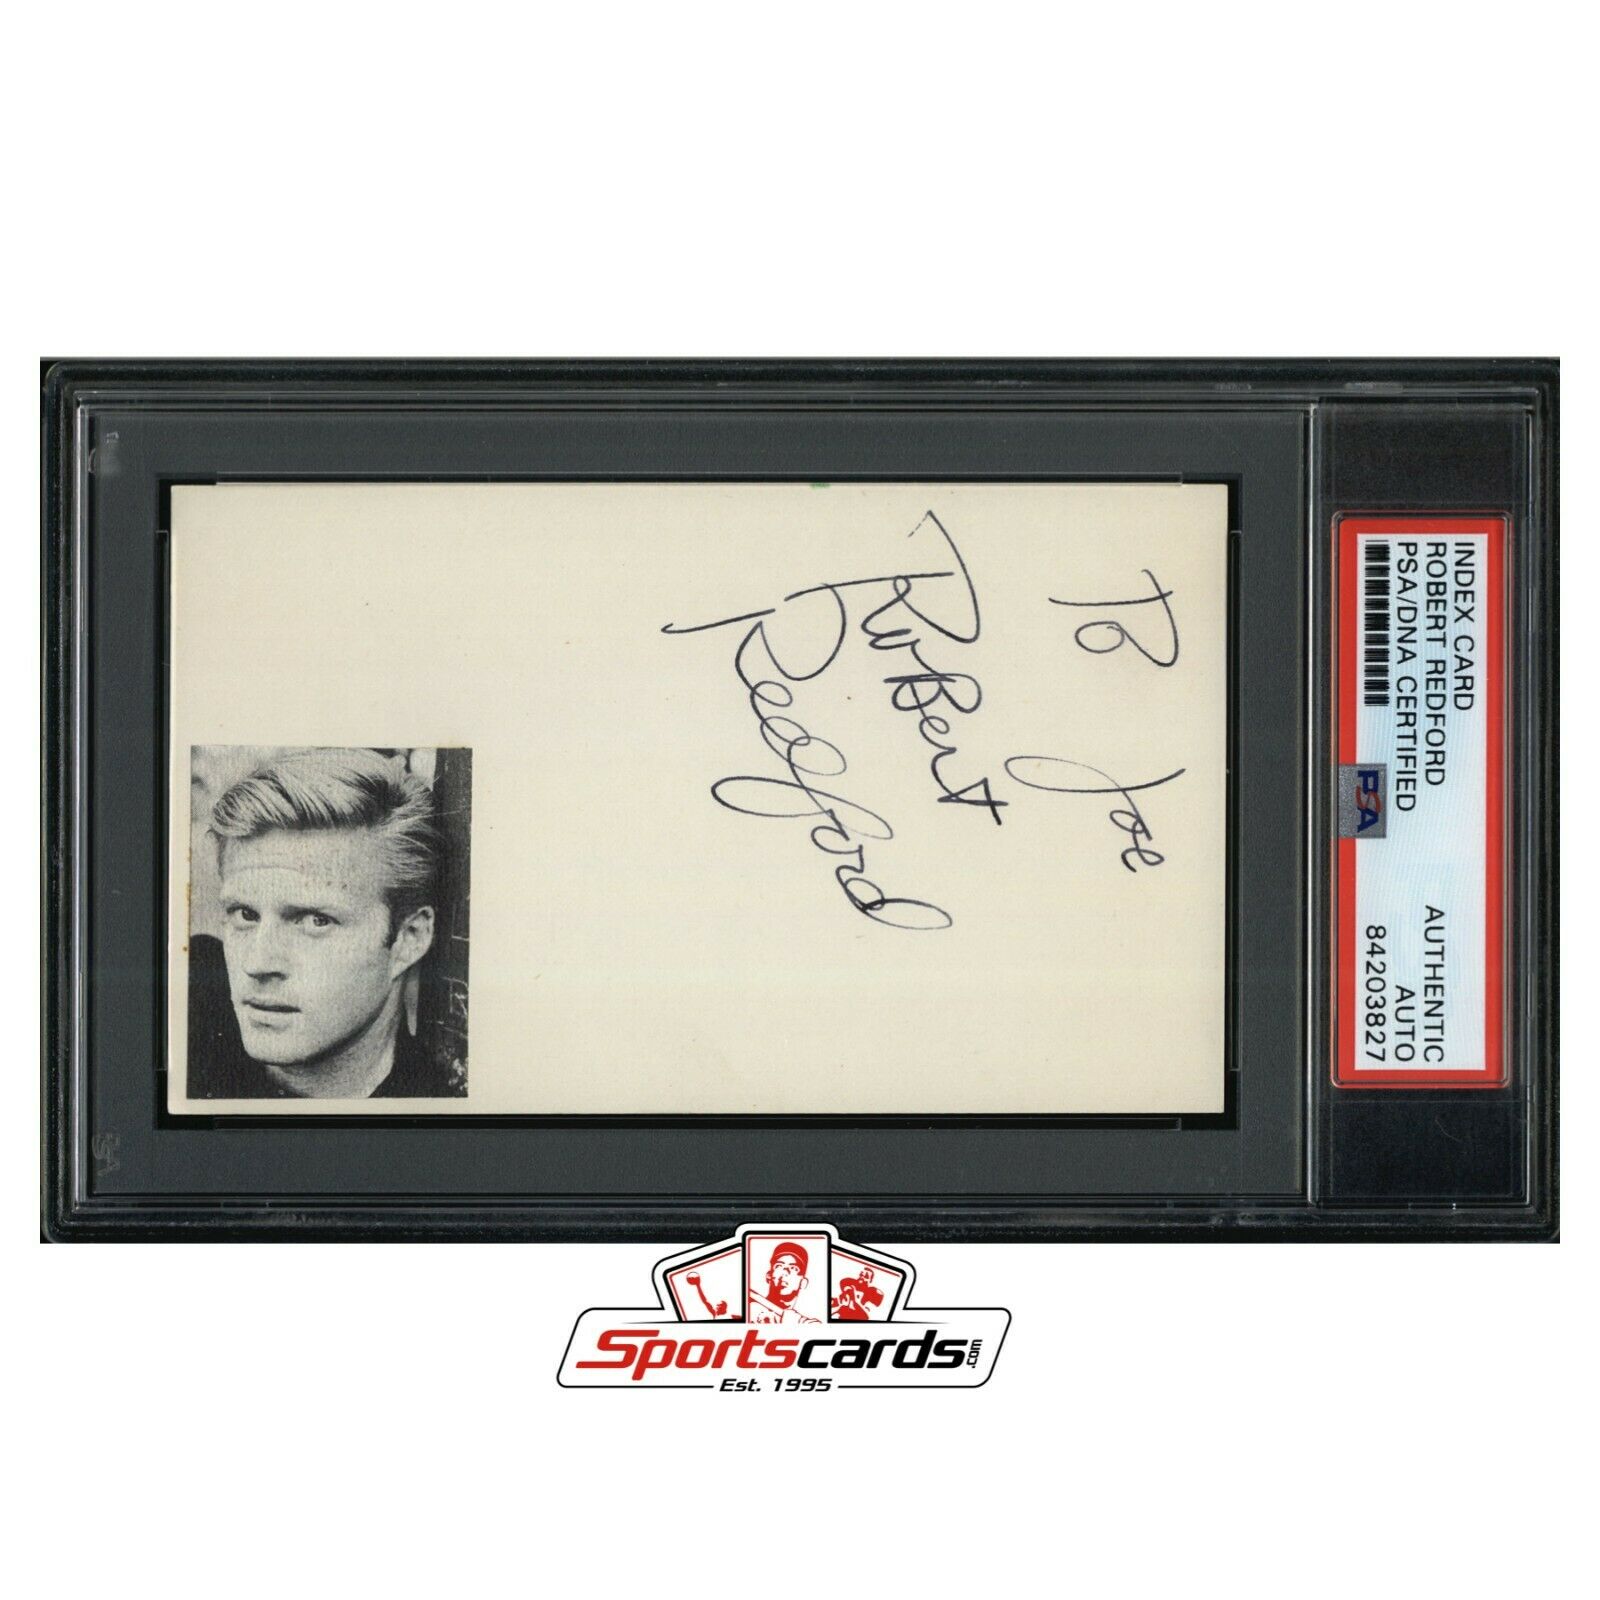 Robert Redford Signed 3x5 Index Card PSA/DNA Actor The Natural - RARE 1959 Auto